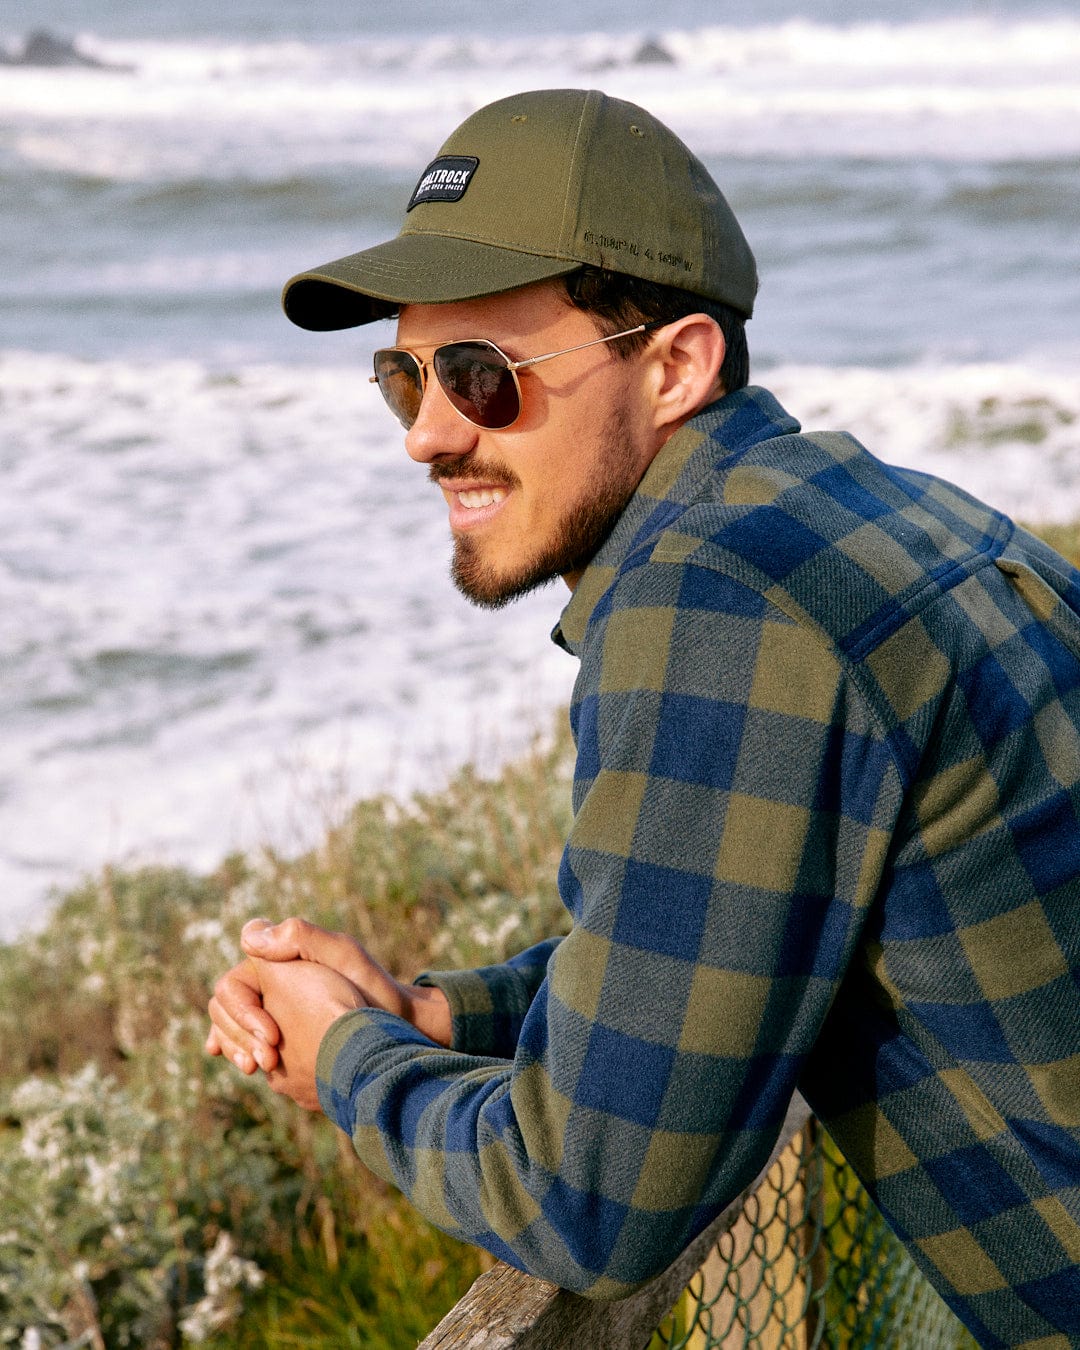 Man in sunglasses and a Saltrock Dockyard - Cap - Green embroidered plaid jacket leaning on a fence by the sea, looking away thoughtfully.